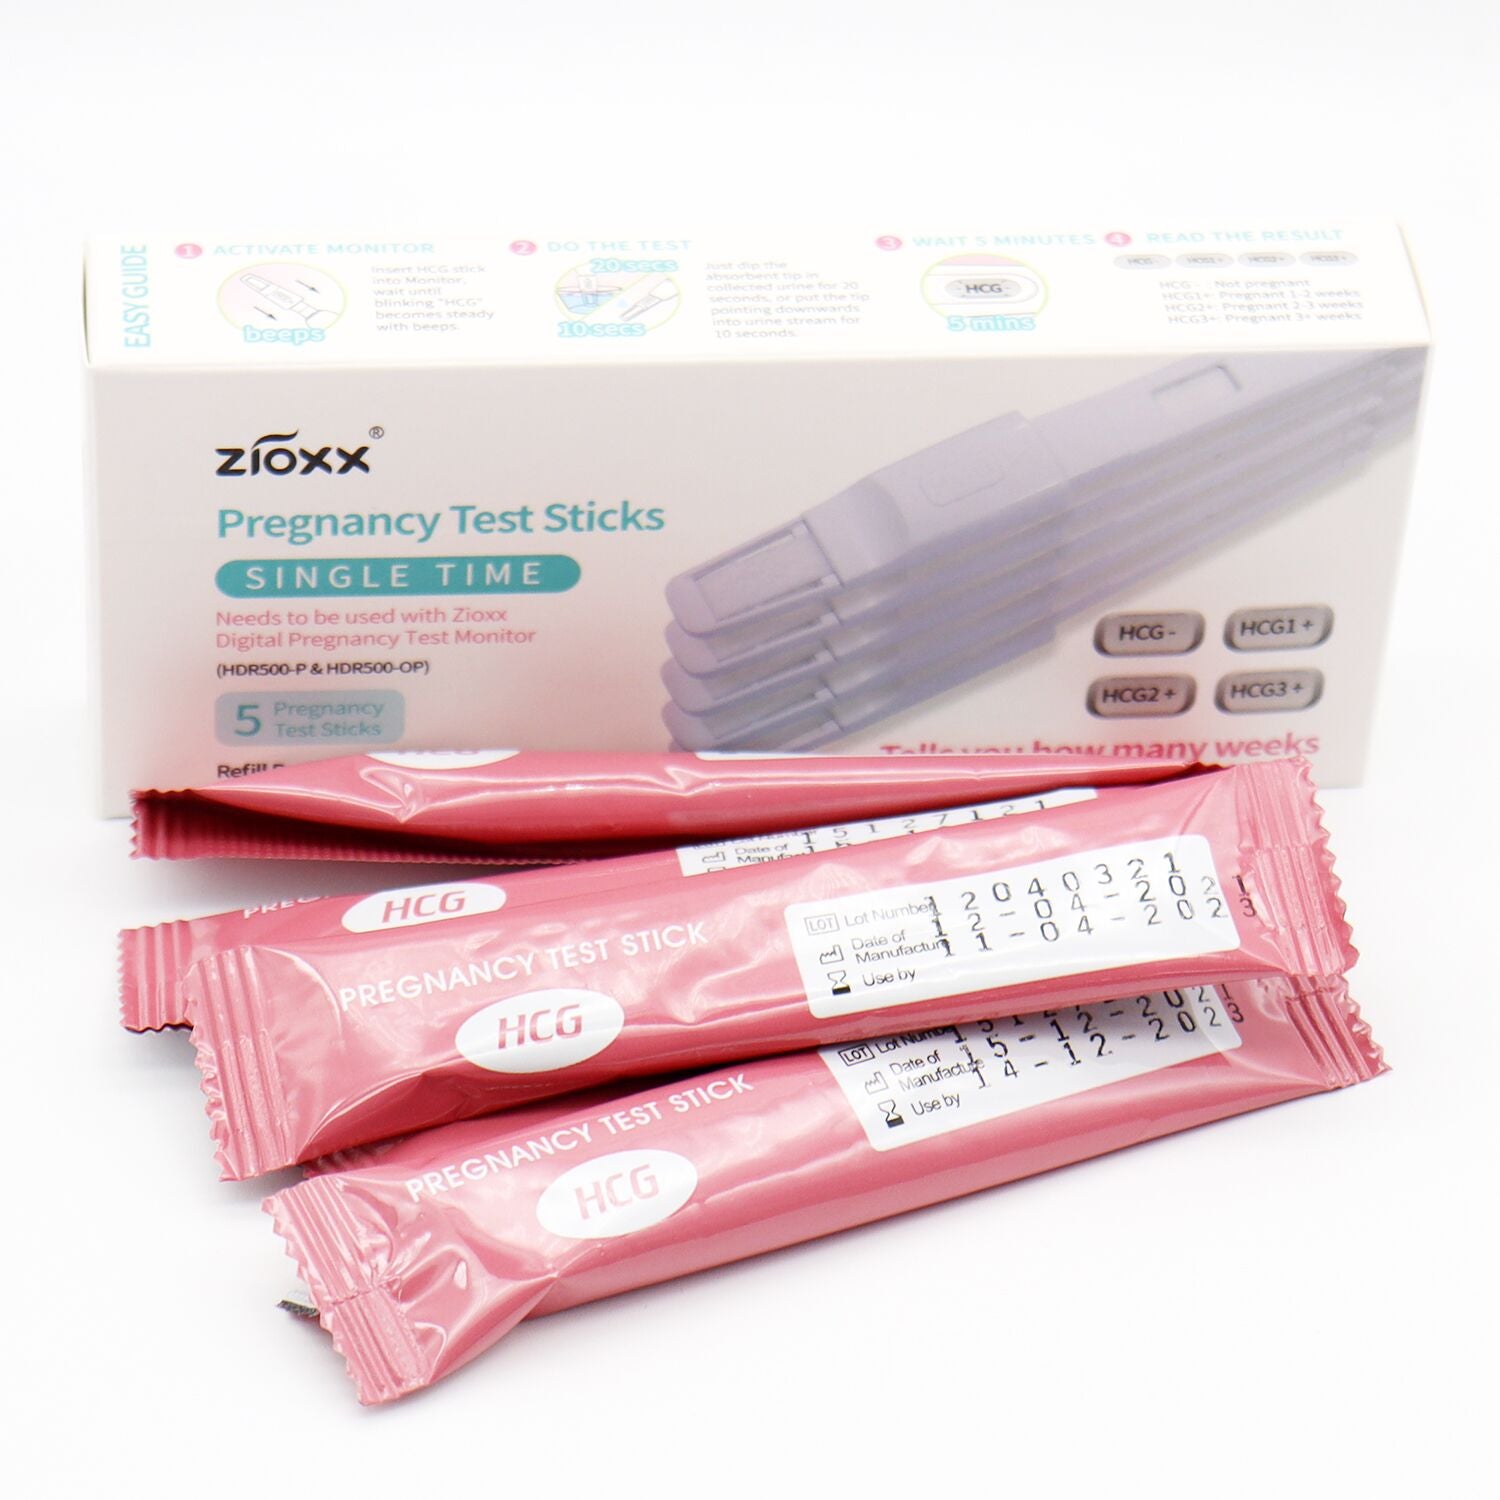 Zioxx Individual Digital Pregnancy Test Sticks 5 Counts HCG Digital Monitor not Included